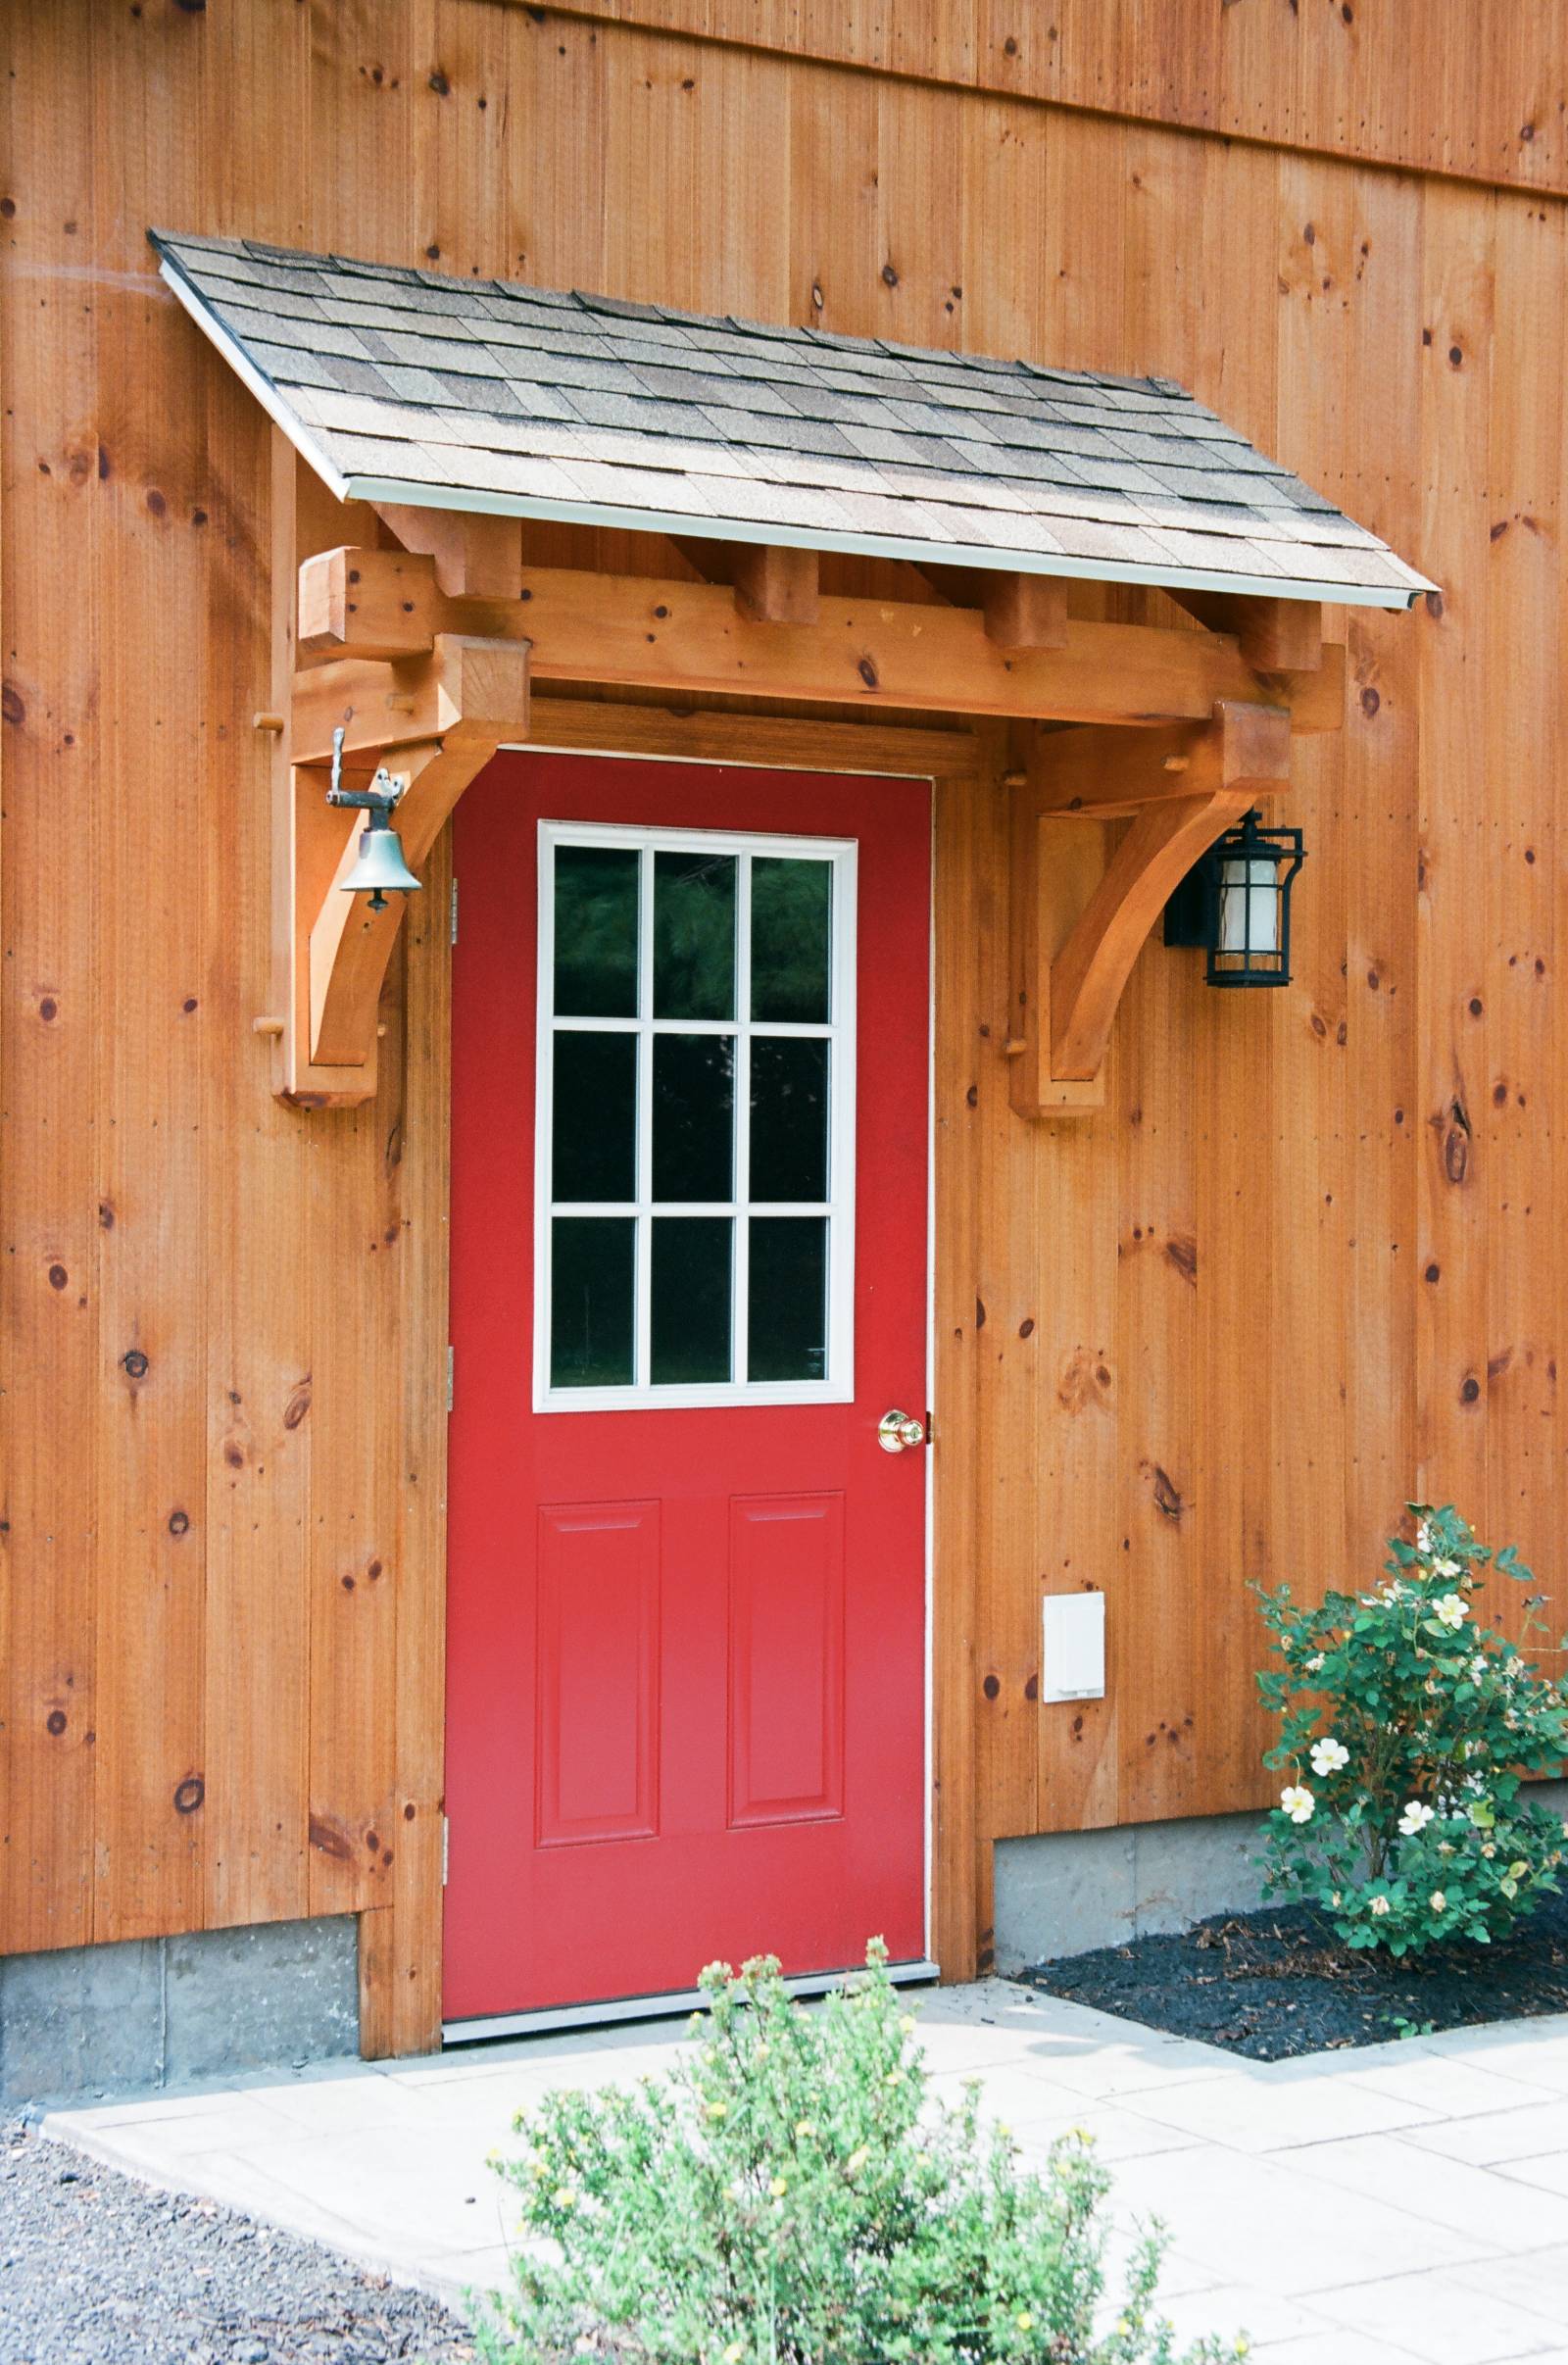 Entry door with timber frame eyebrow roof